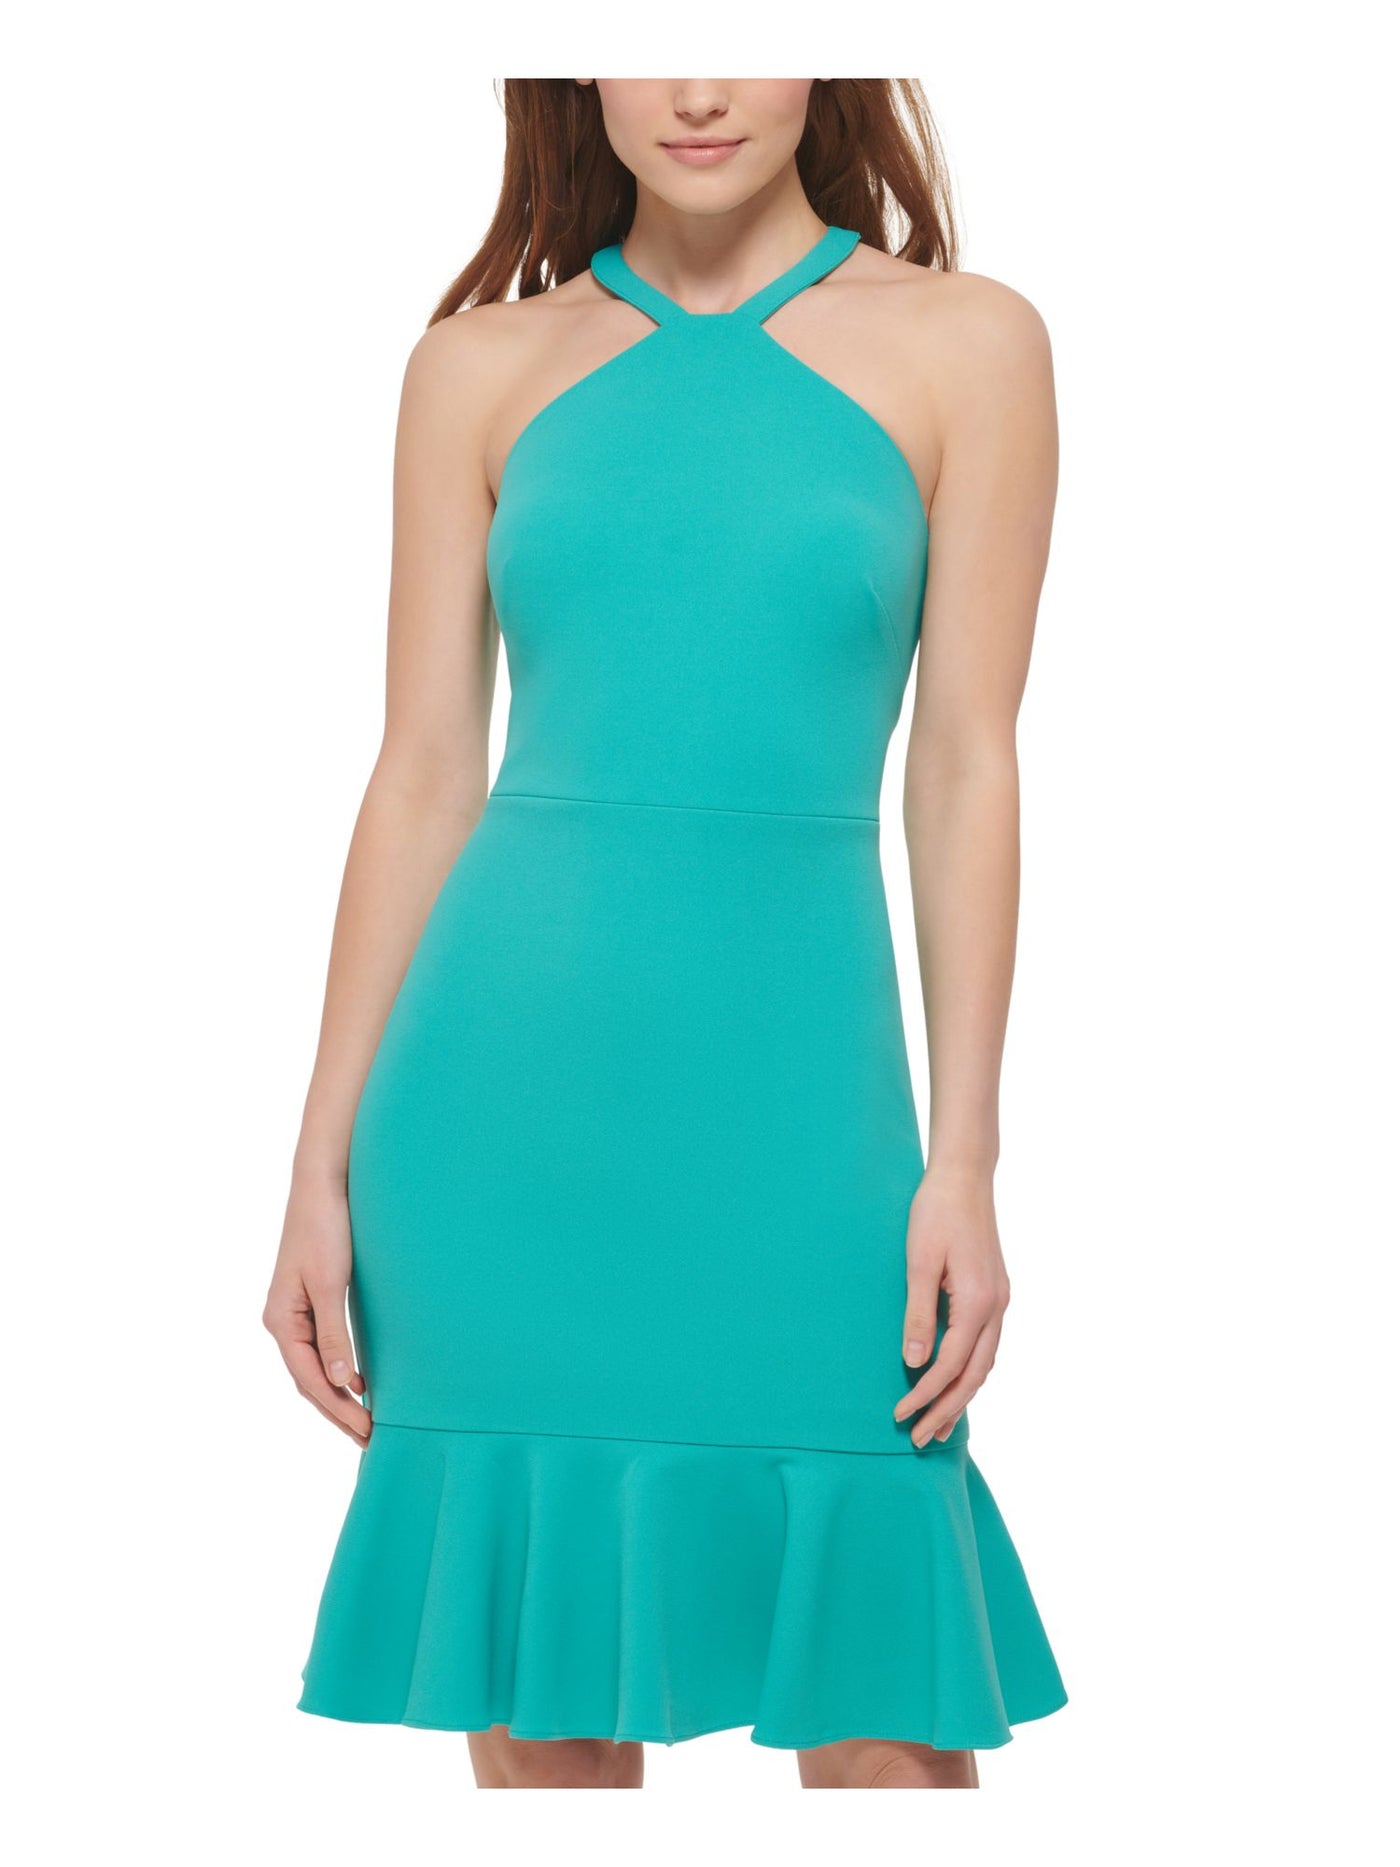 VINCE CAMUTO Womens Turquoise Zippered Ruffled Cutout Back Lined Sleeveless Halter Above The Knee Party Sheath Dress 8